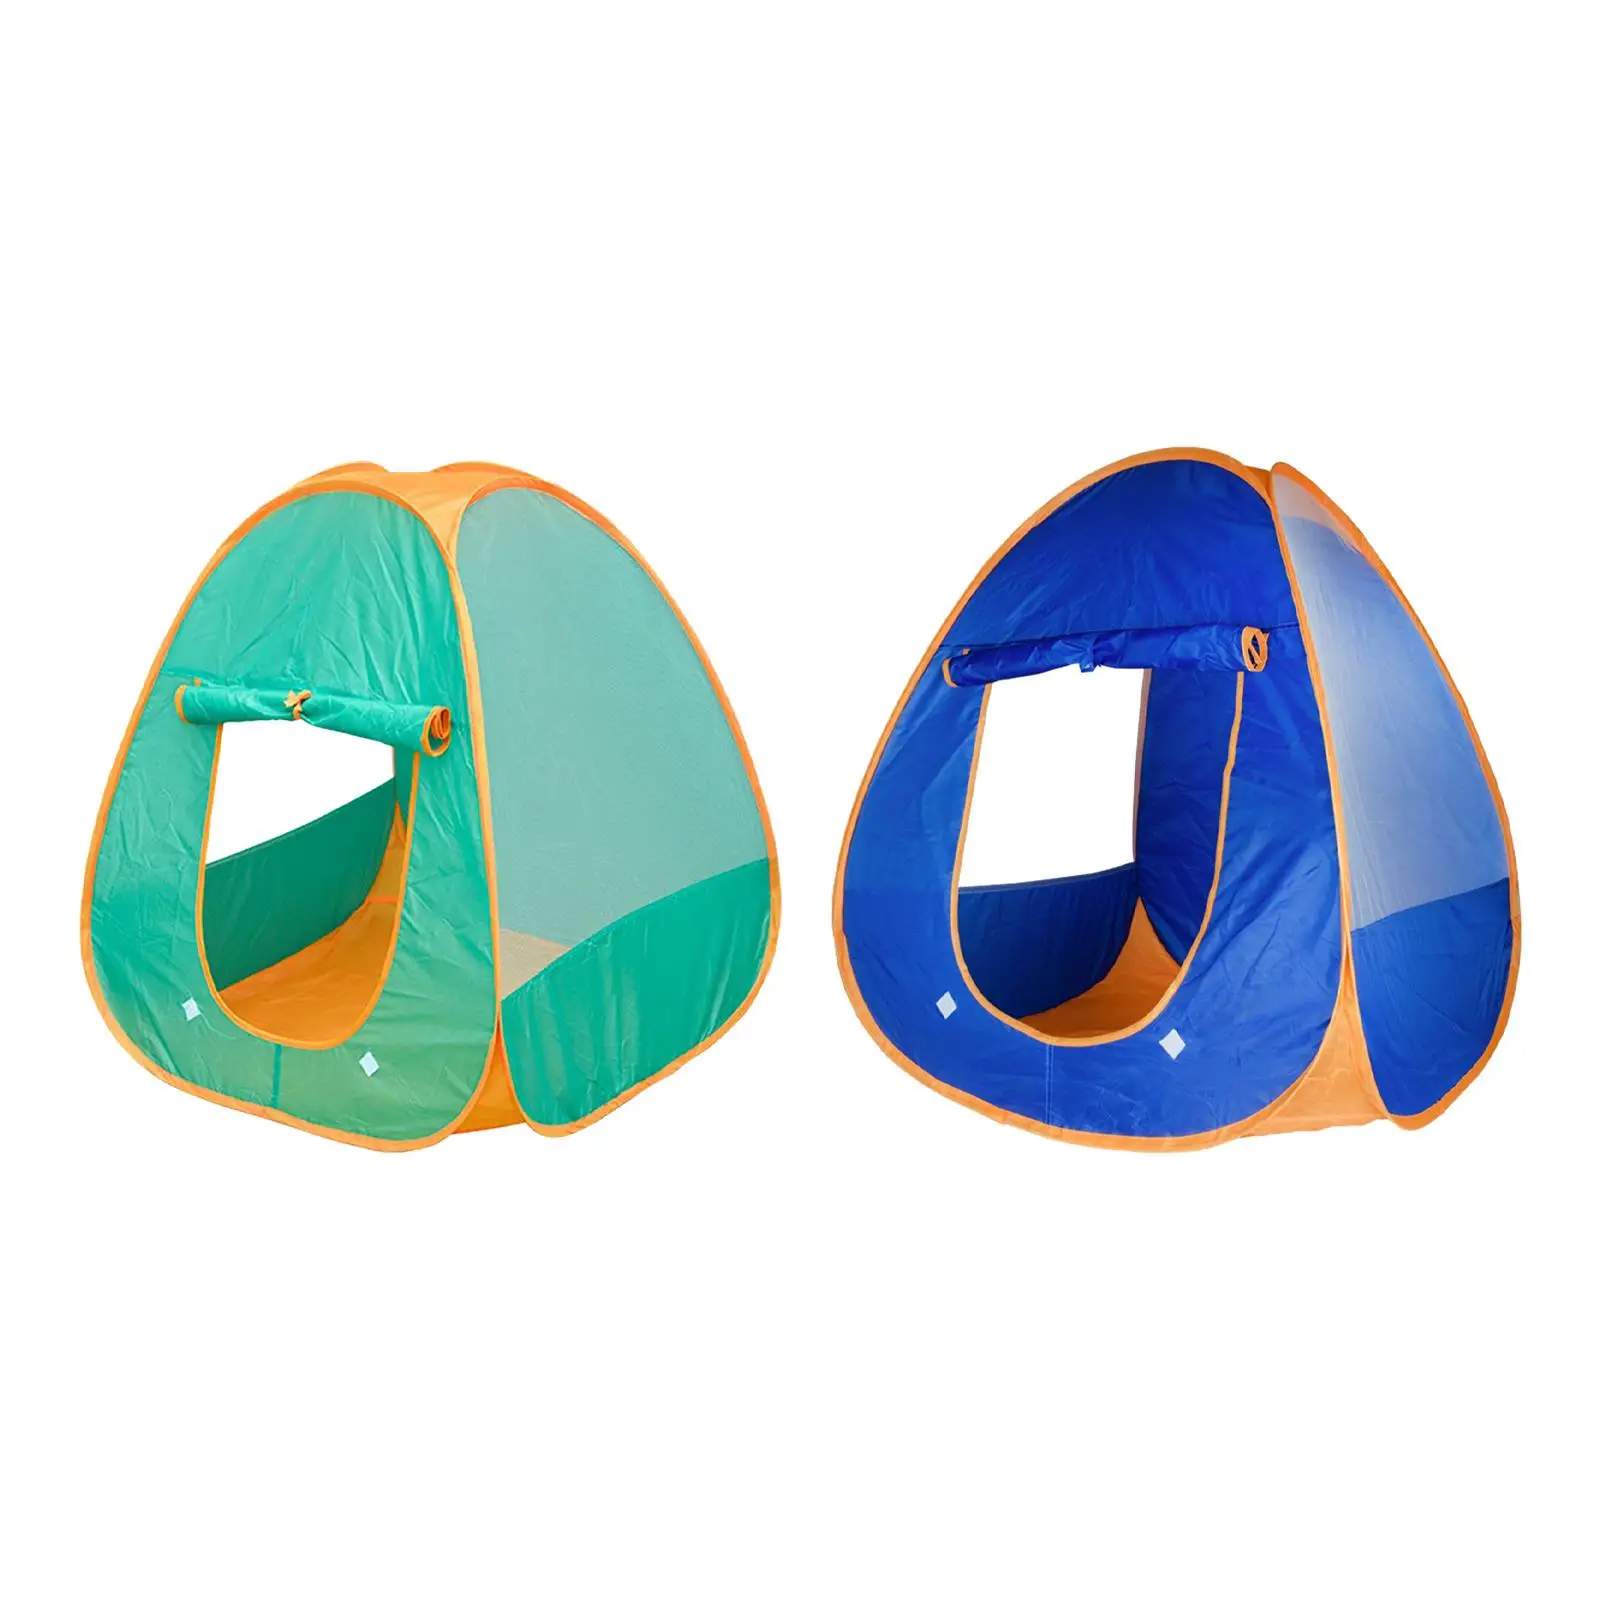 Children Play Tent Collapsible Playhouse Toys for Beach Indoor Outdoor